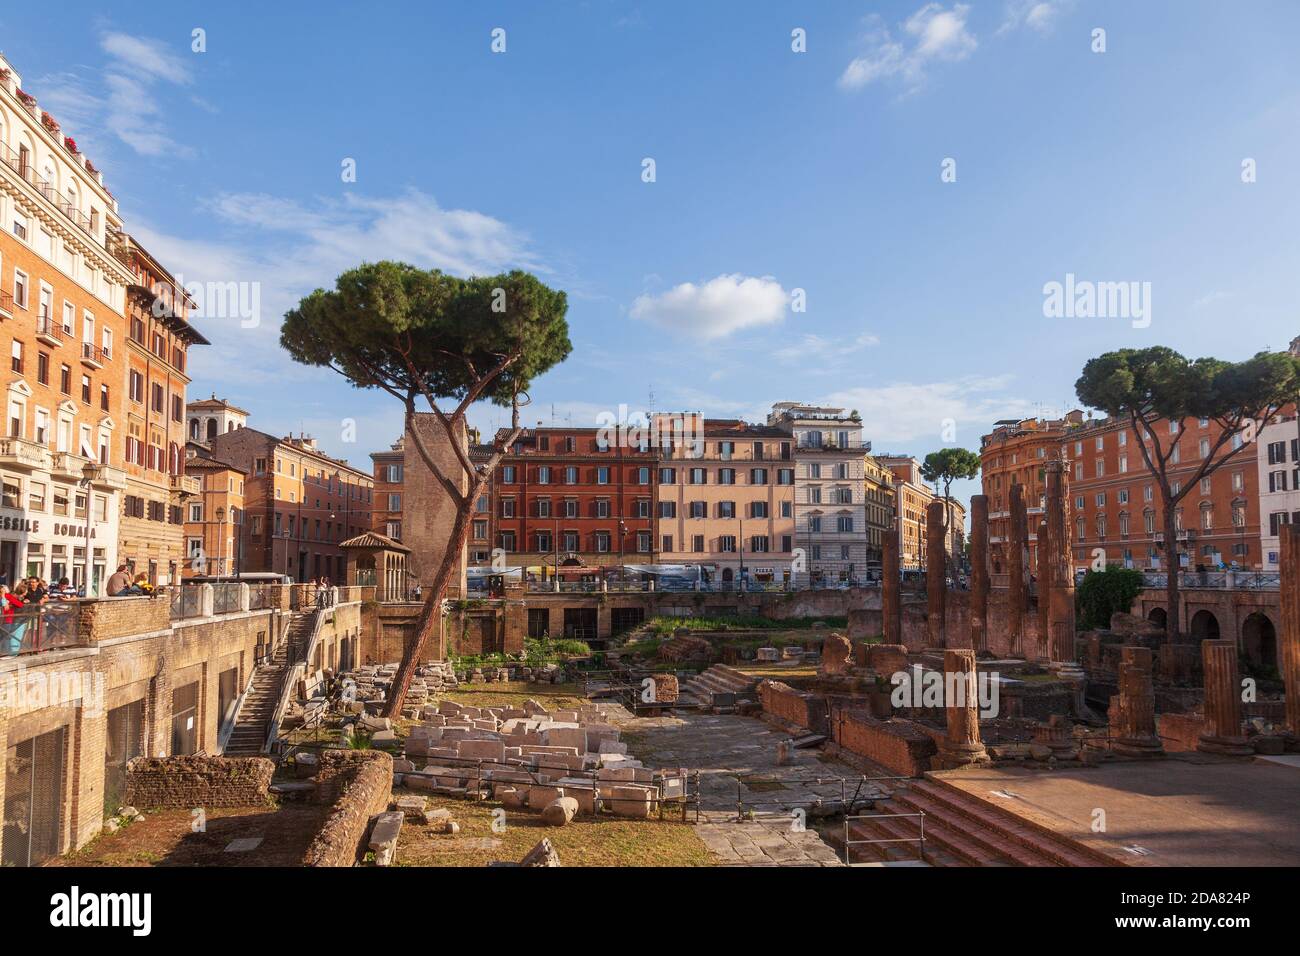 Rome, Italy - May 5, 2016: Tourists overlooking excavated ruins of Roman temples at Area sacra of Largo di Torre Argentina archaeological area Stock Photo